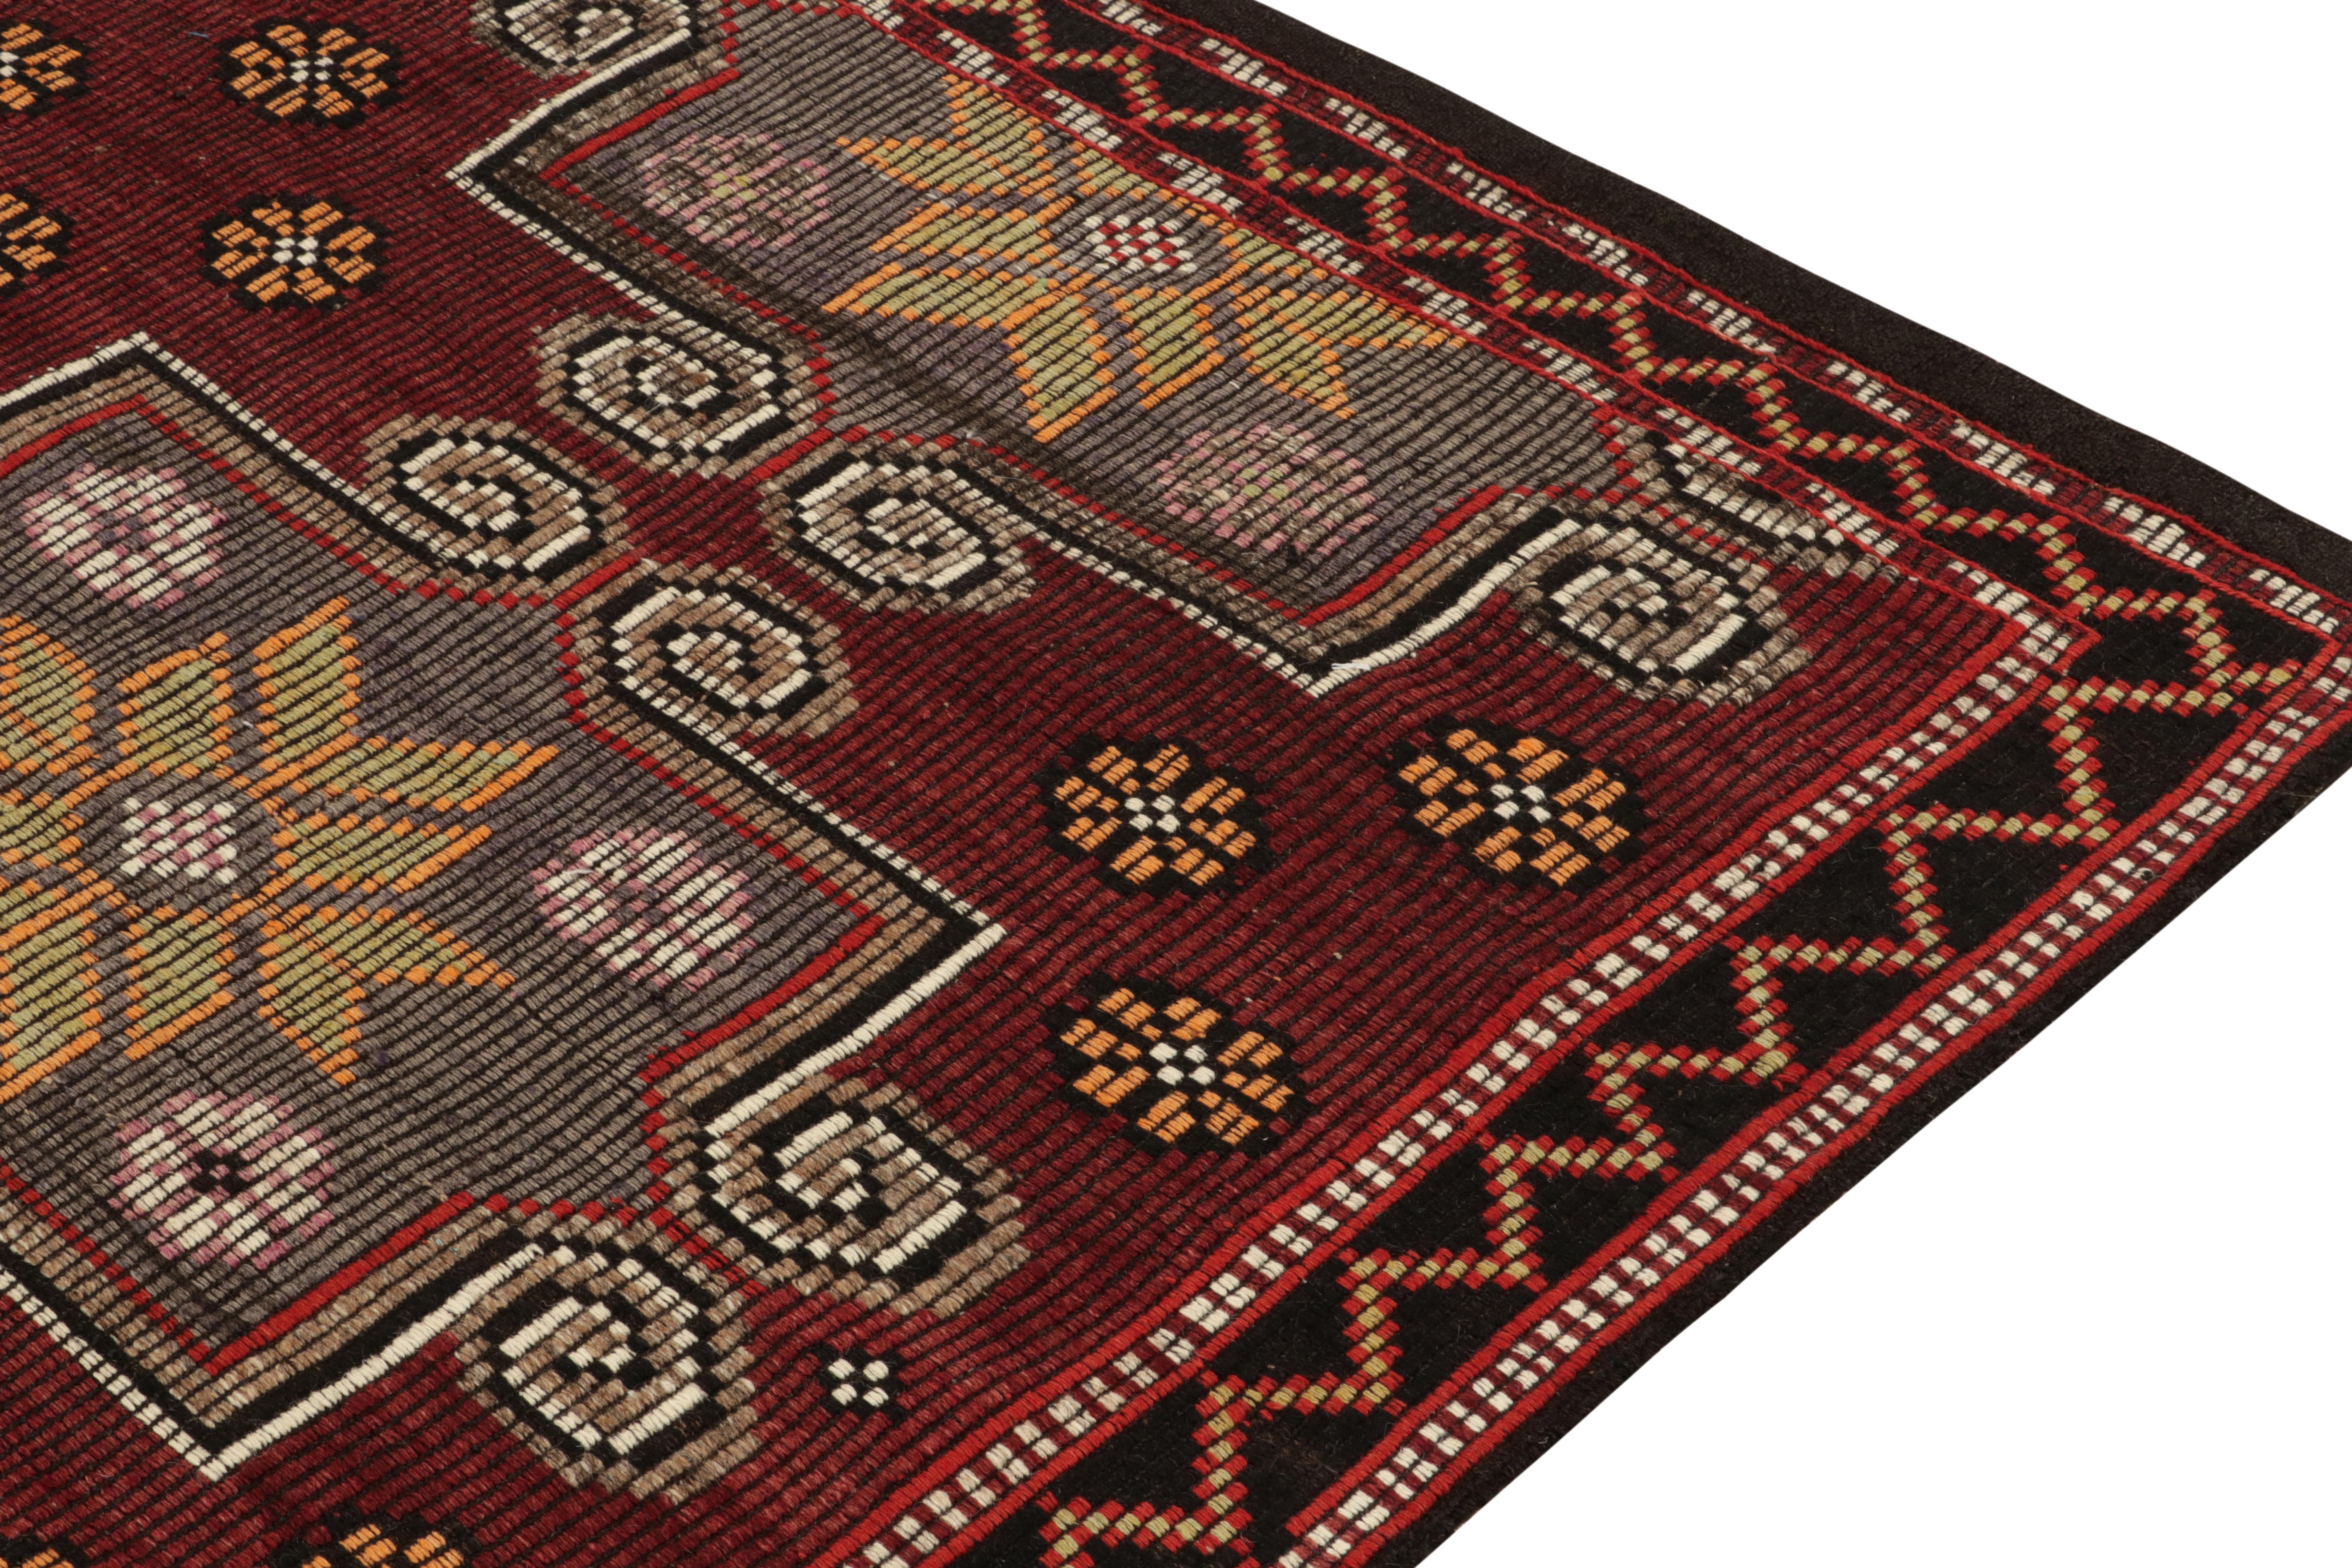 Vintage Chaput Kilim Rug in Red, Beige-Brown Geometric Floral by Rug & Kilim In Good Condition For Sale In Long Island City, NY